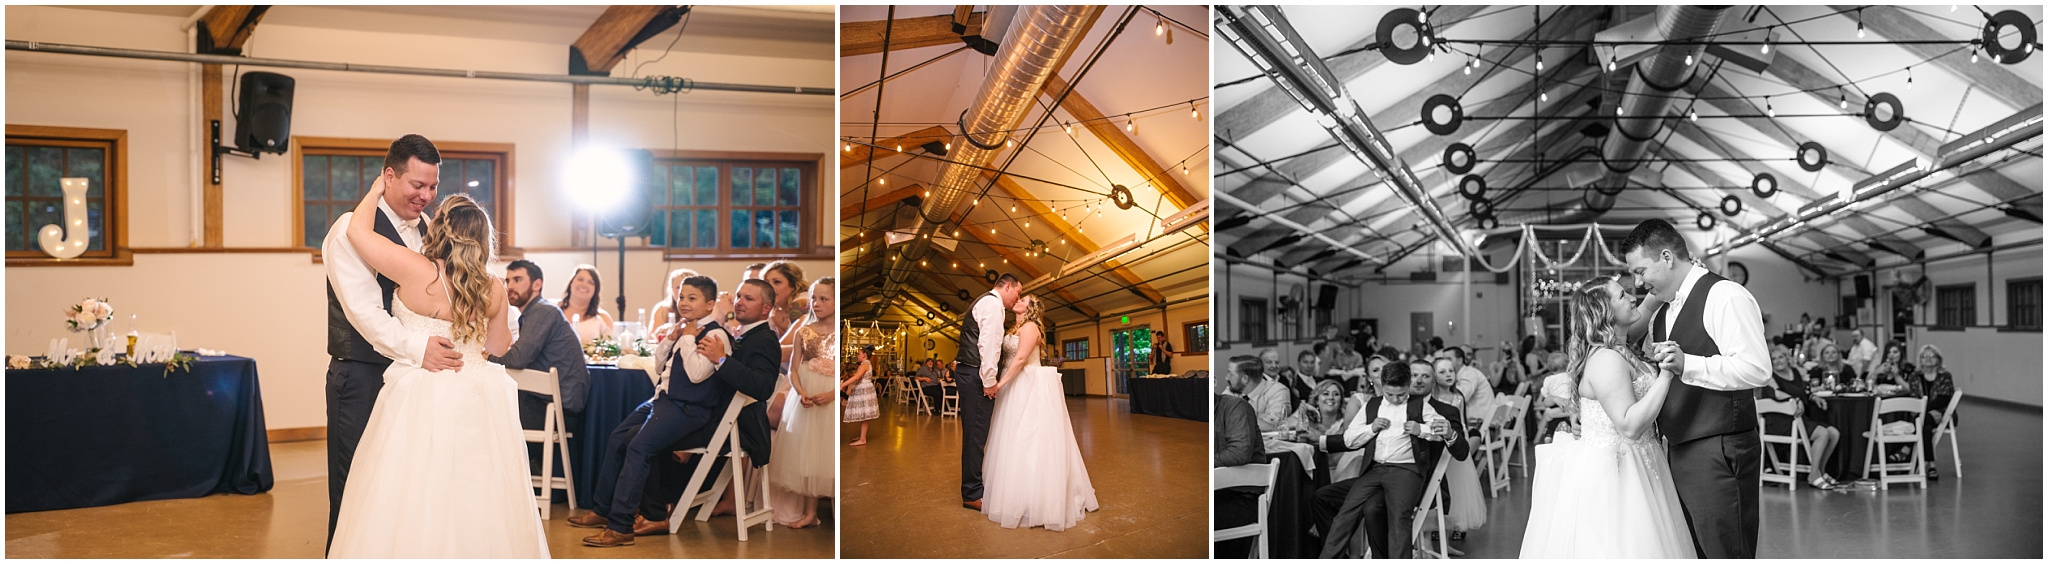 Bride and groom's first dance at Pickering Barn wedding reception in Issaquah Washington